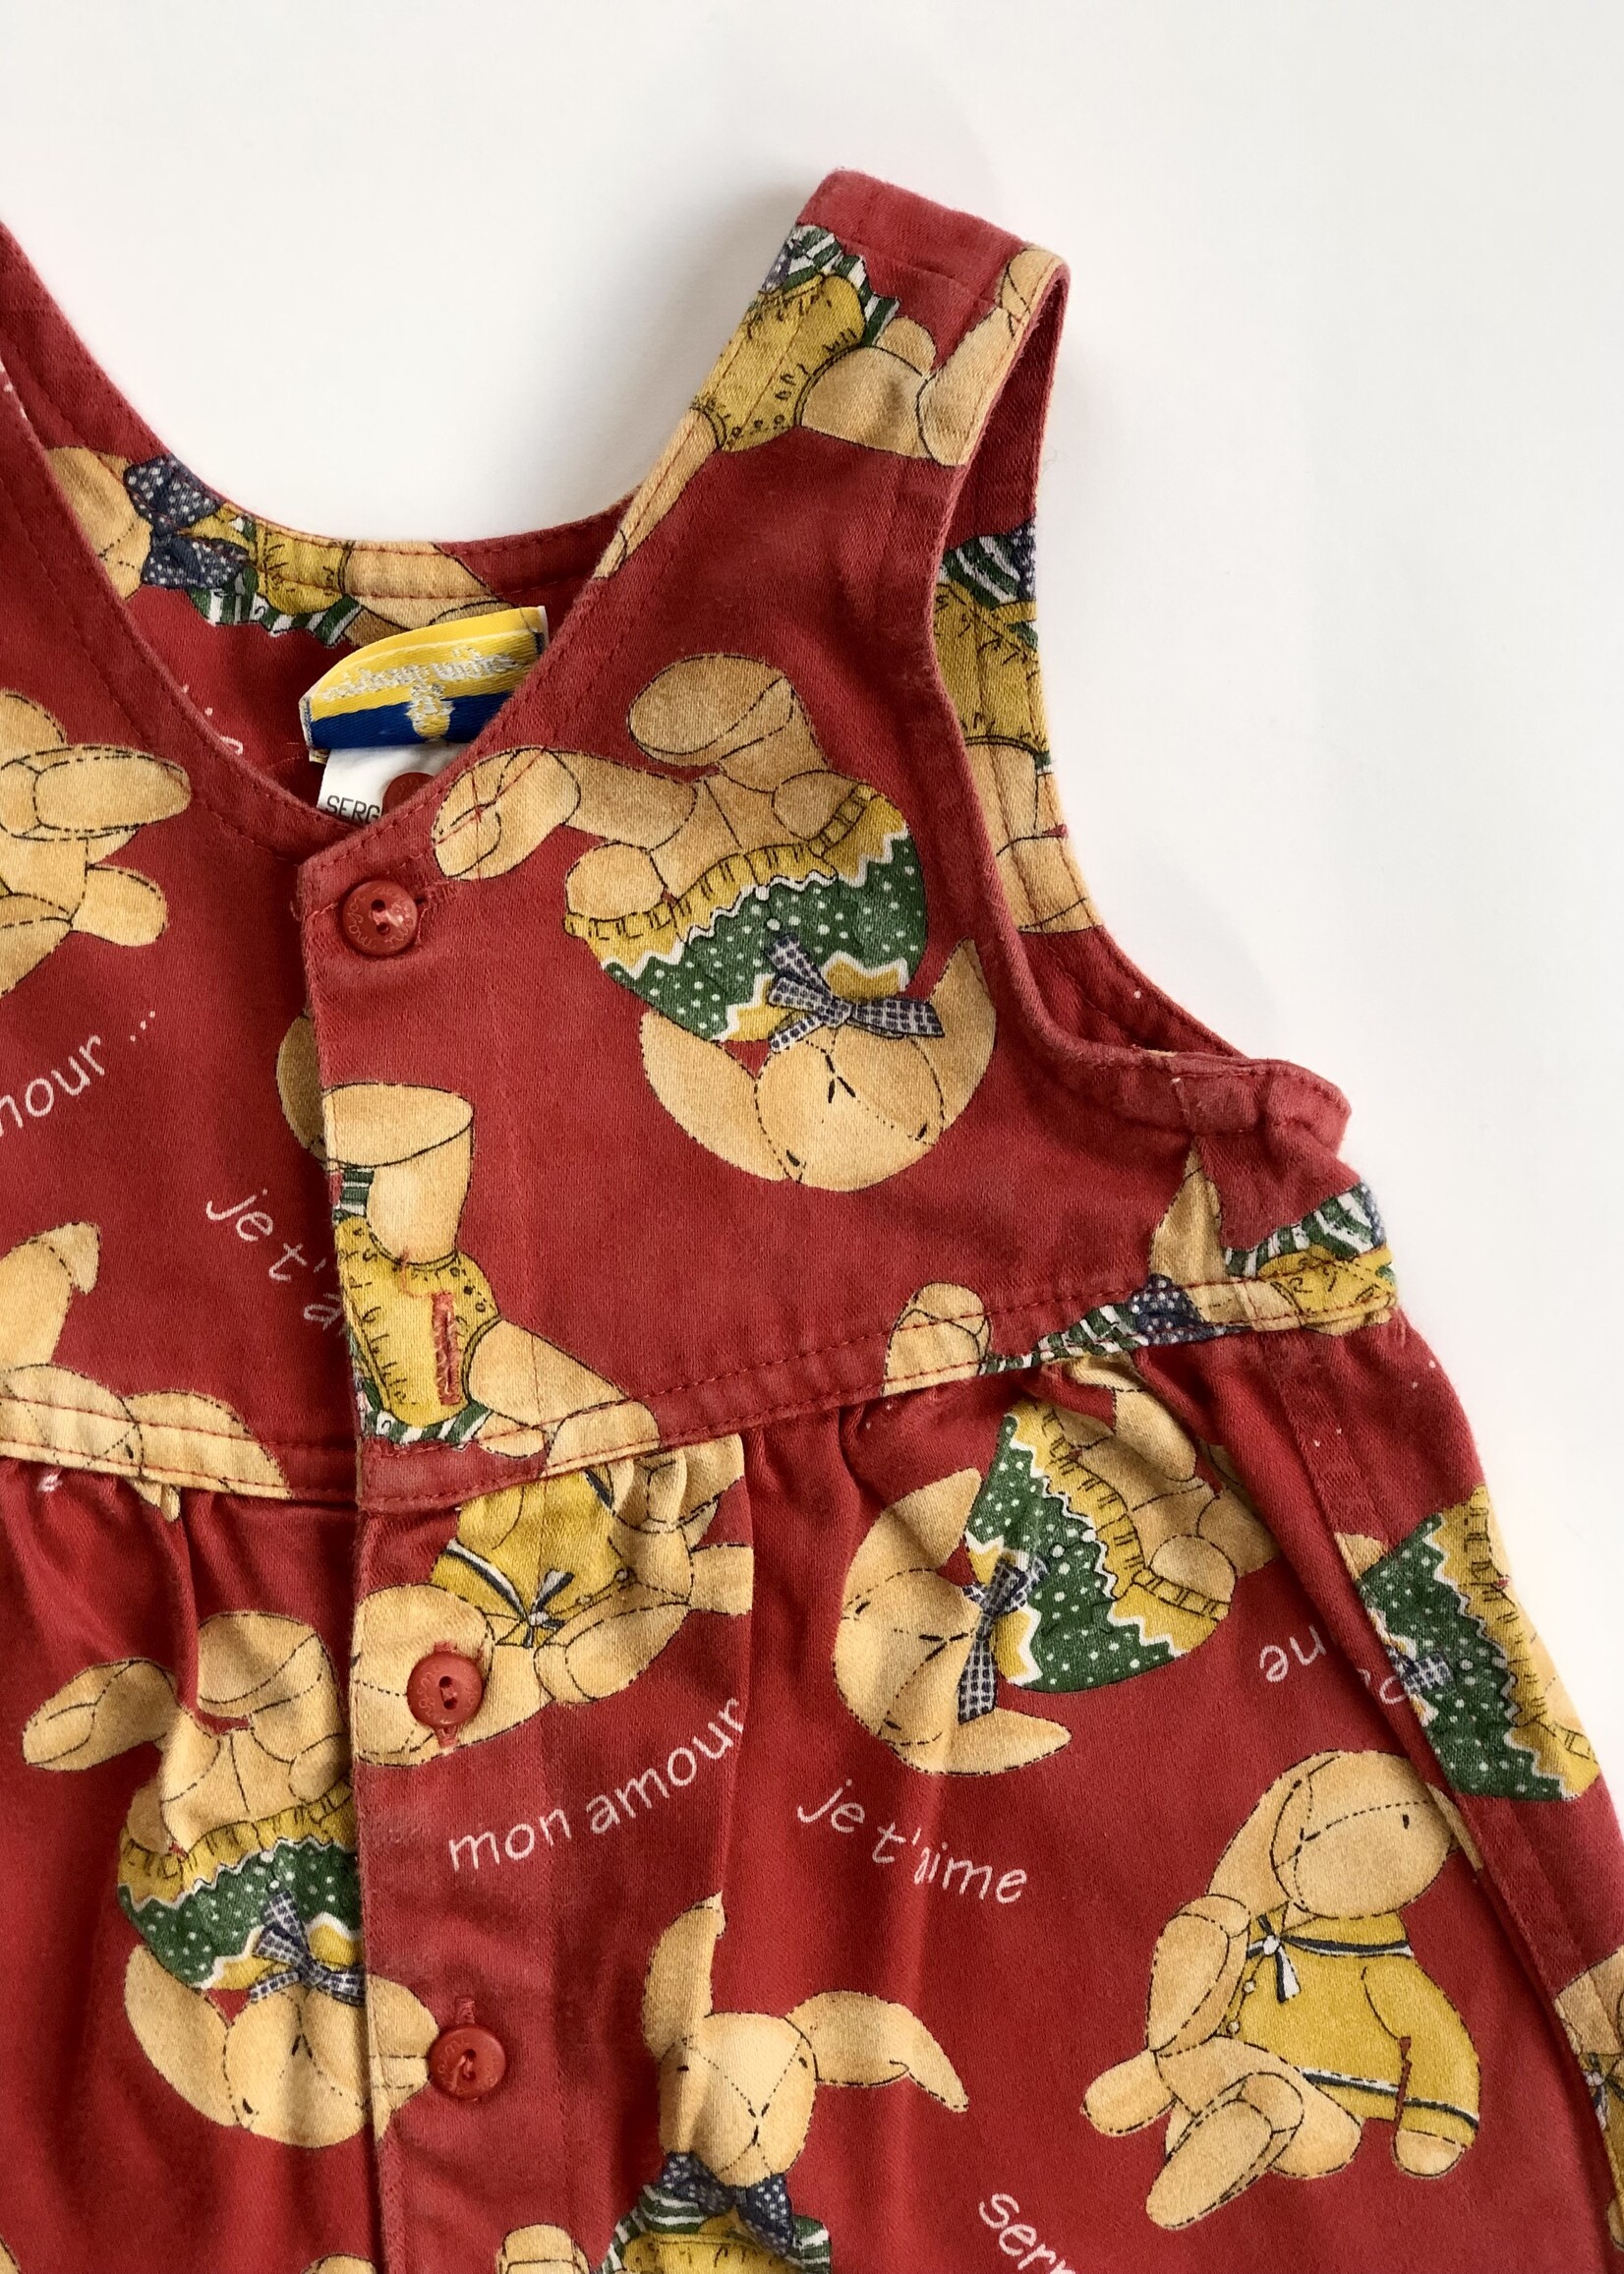 Red Rabbit dungarees 9m